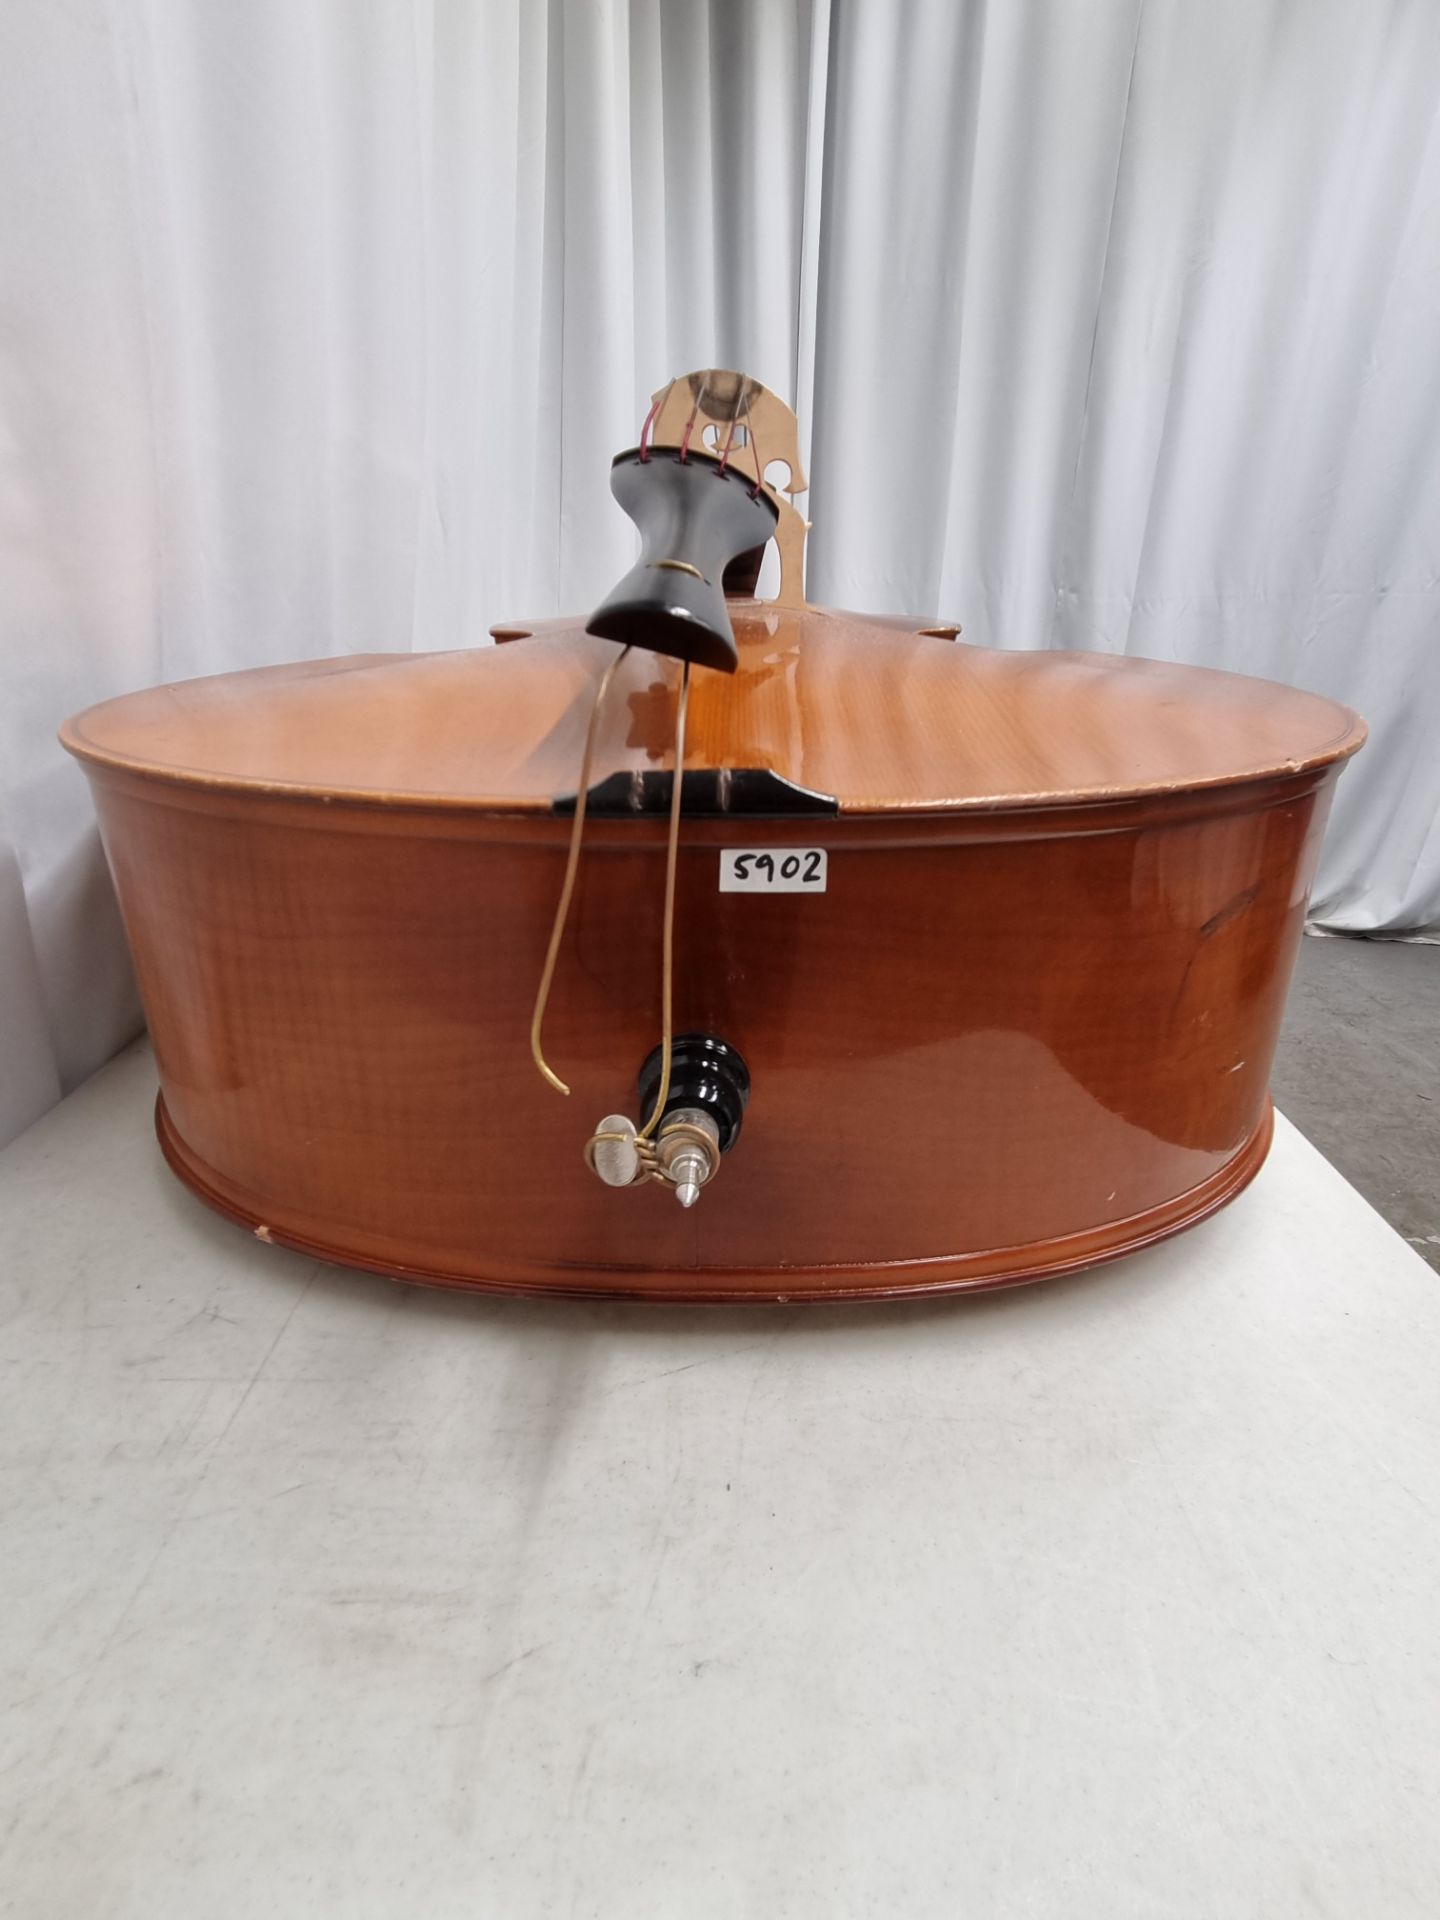 Roderich Paesold 590P Double bass & case - Image 14 of 30